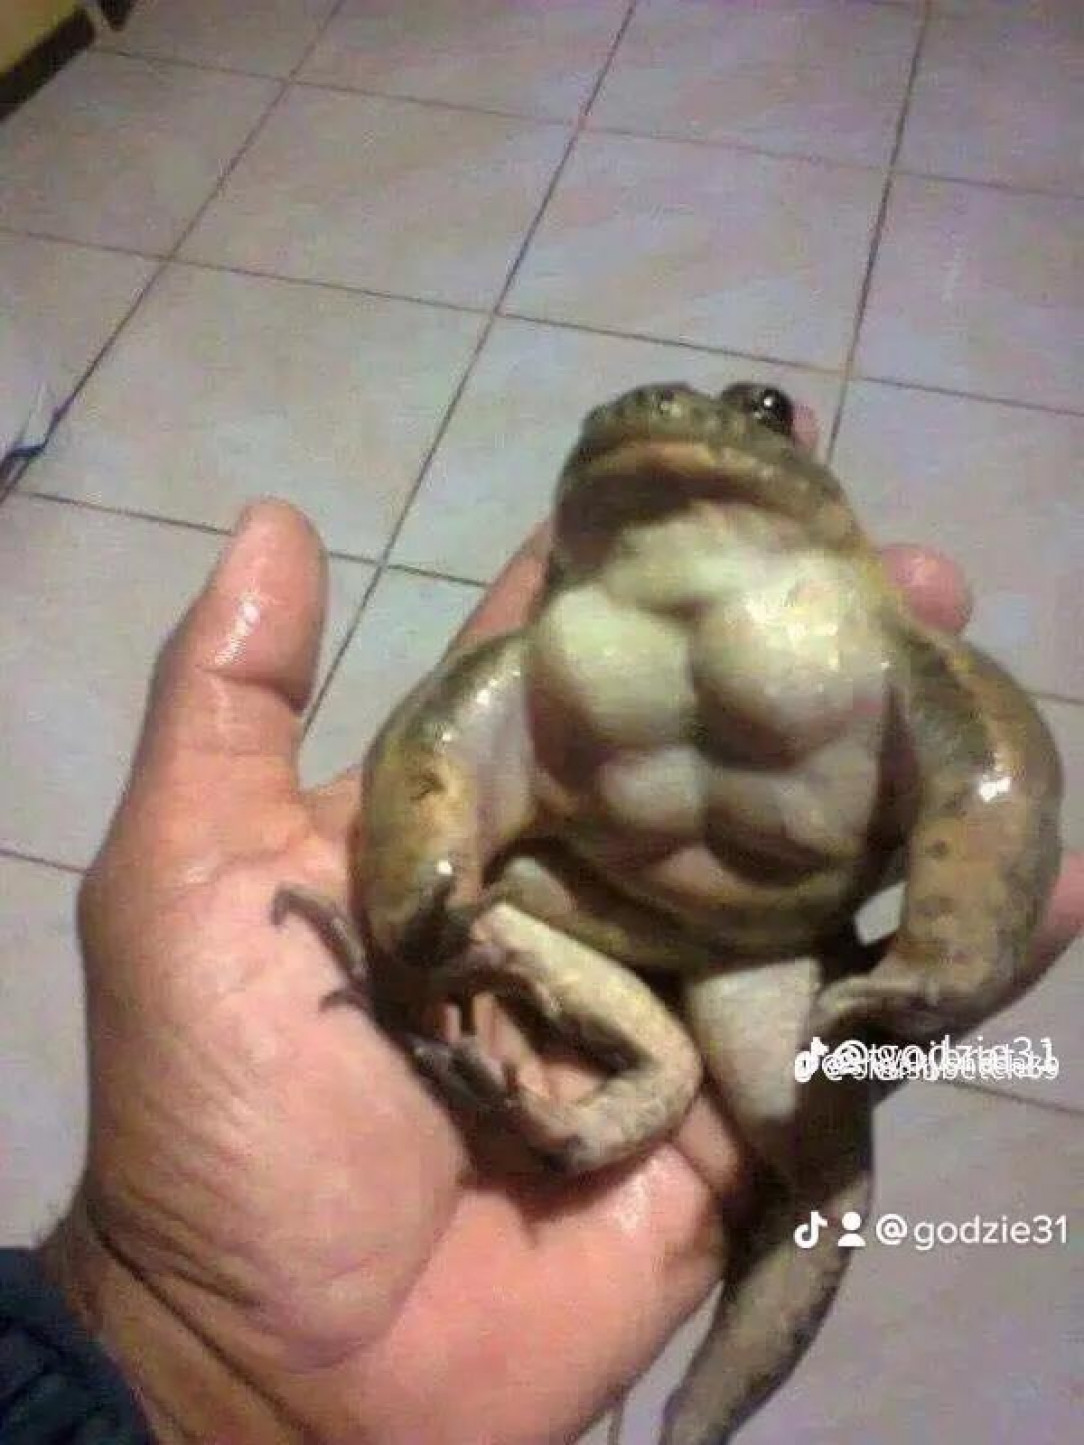 ribby, he&#039;s been eating nothing but protein since he was a tadpole